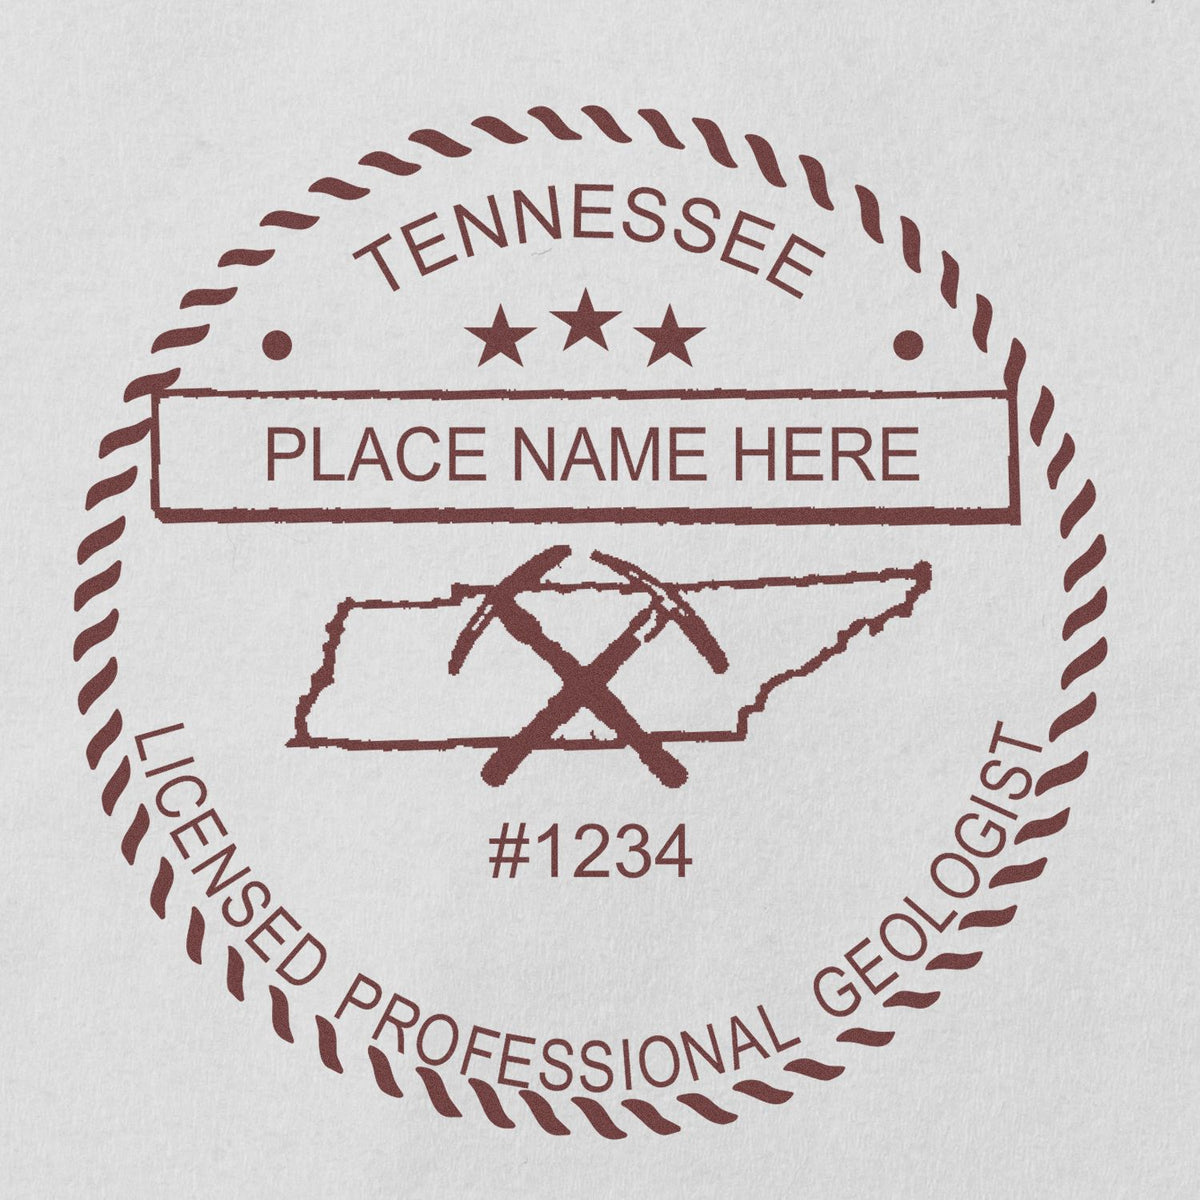 A photograph of the Premium MaxLight Pre-Inked Tennessee Geology Stamp stamp impression reveals a vivid, professional image of the on paper.